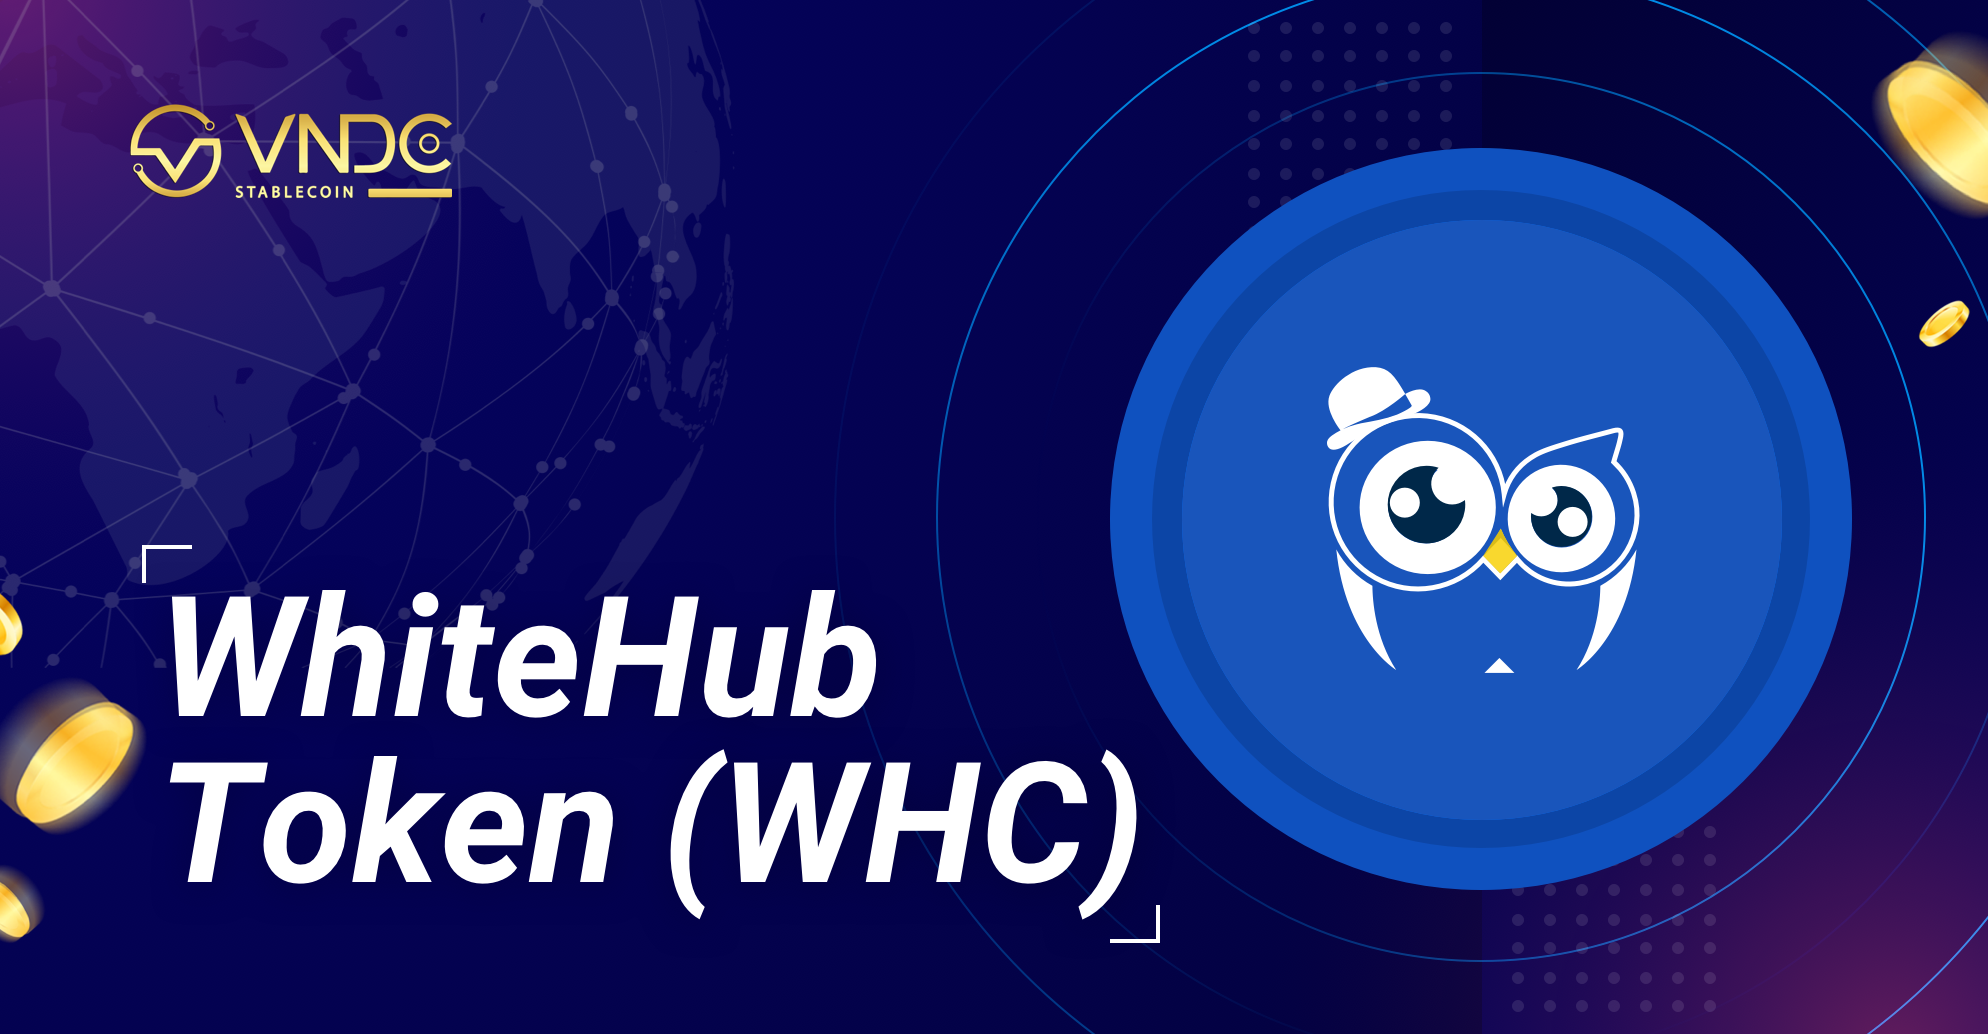 WhiteHub Token (WHC) is officially listed on VNDC Wallet